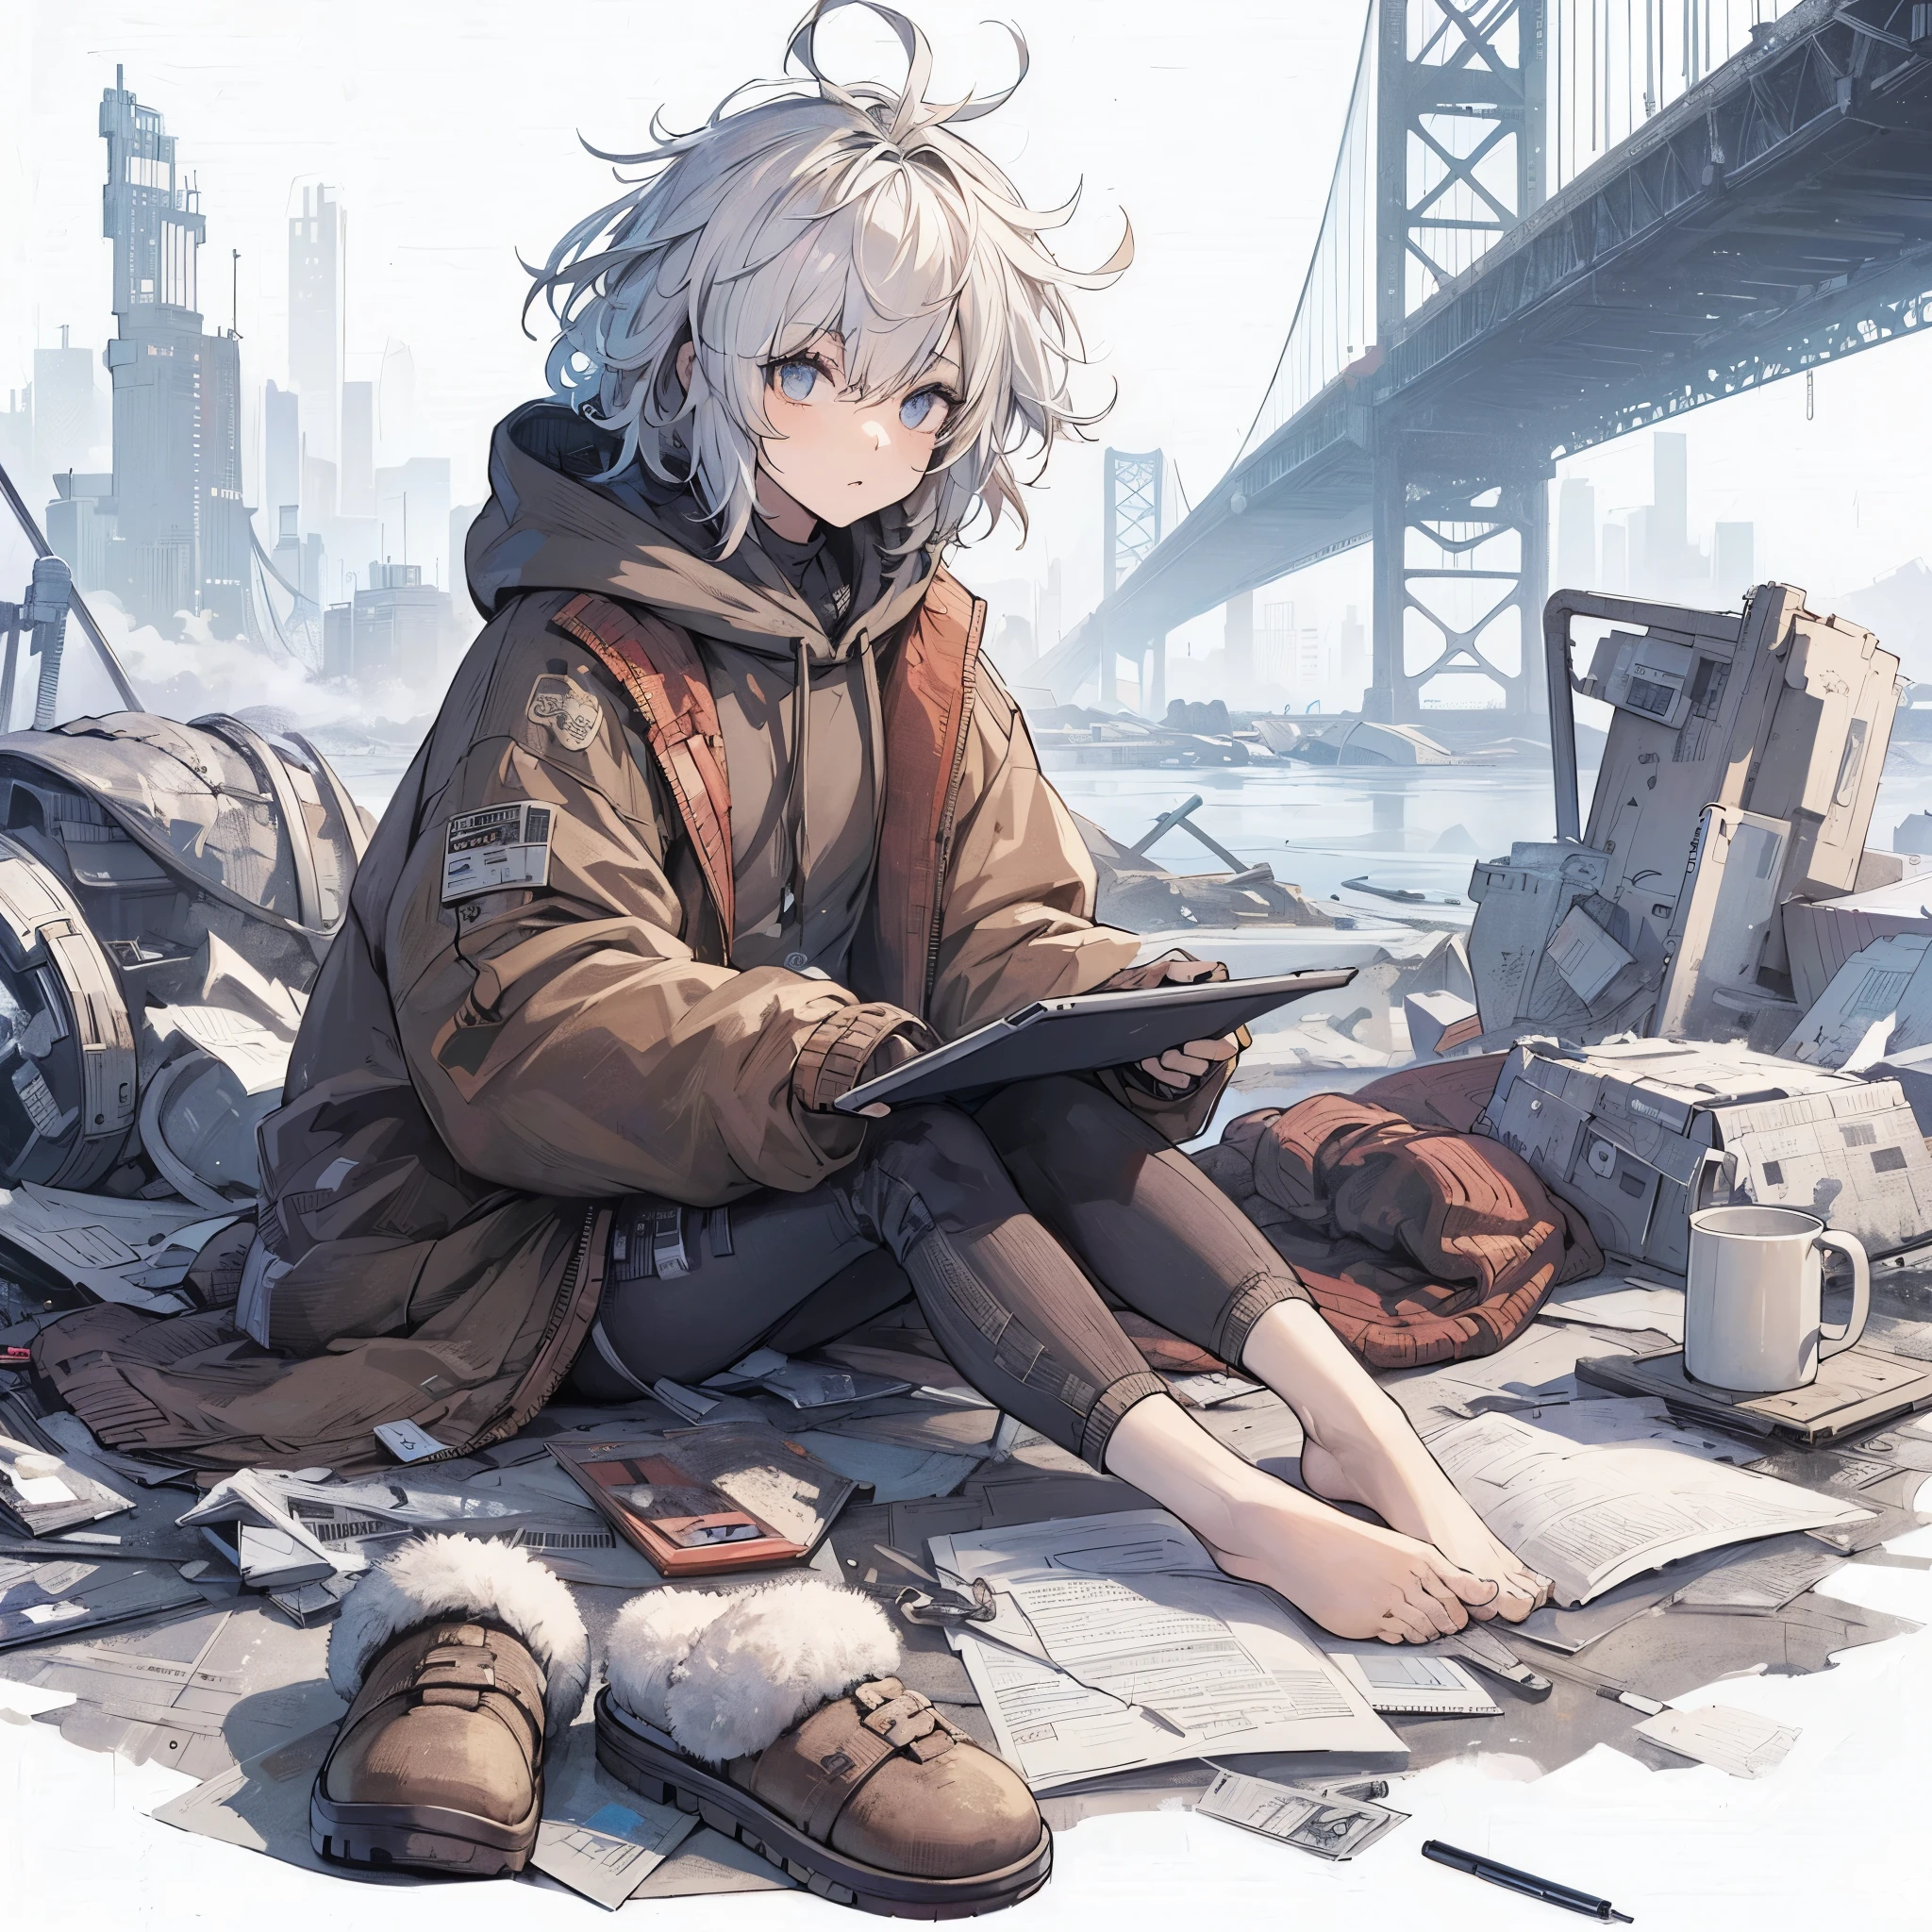 (Masterpiece, top quality), (detailed hair), super detailed, anime style, full body, solo, concept art, Cyberpunk hacker girl with shaggy white hair, a drab hoodie, indoor slippers, and a tablet device, white background, whole body, standing in wasteland,
